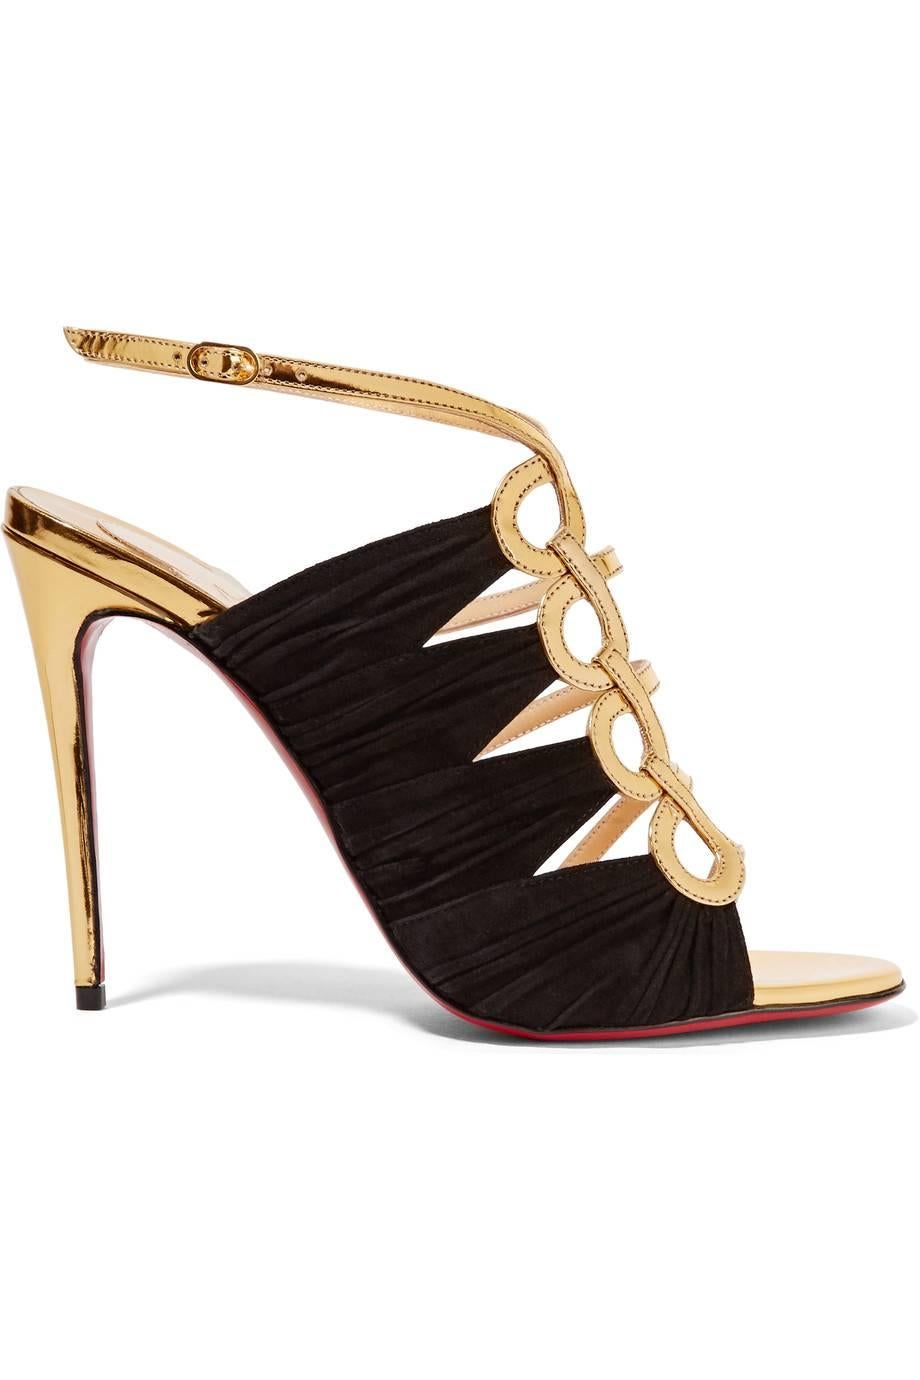 Women's Christian Louboutin New Black Gold Cut Out Evening Sandals Heels in Box